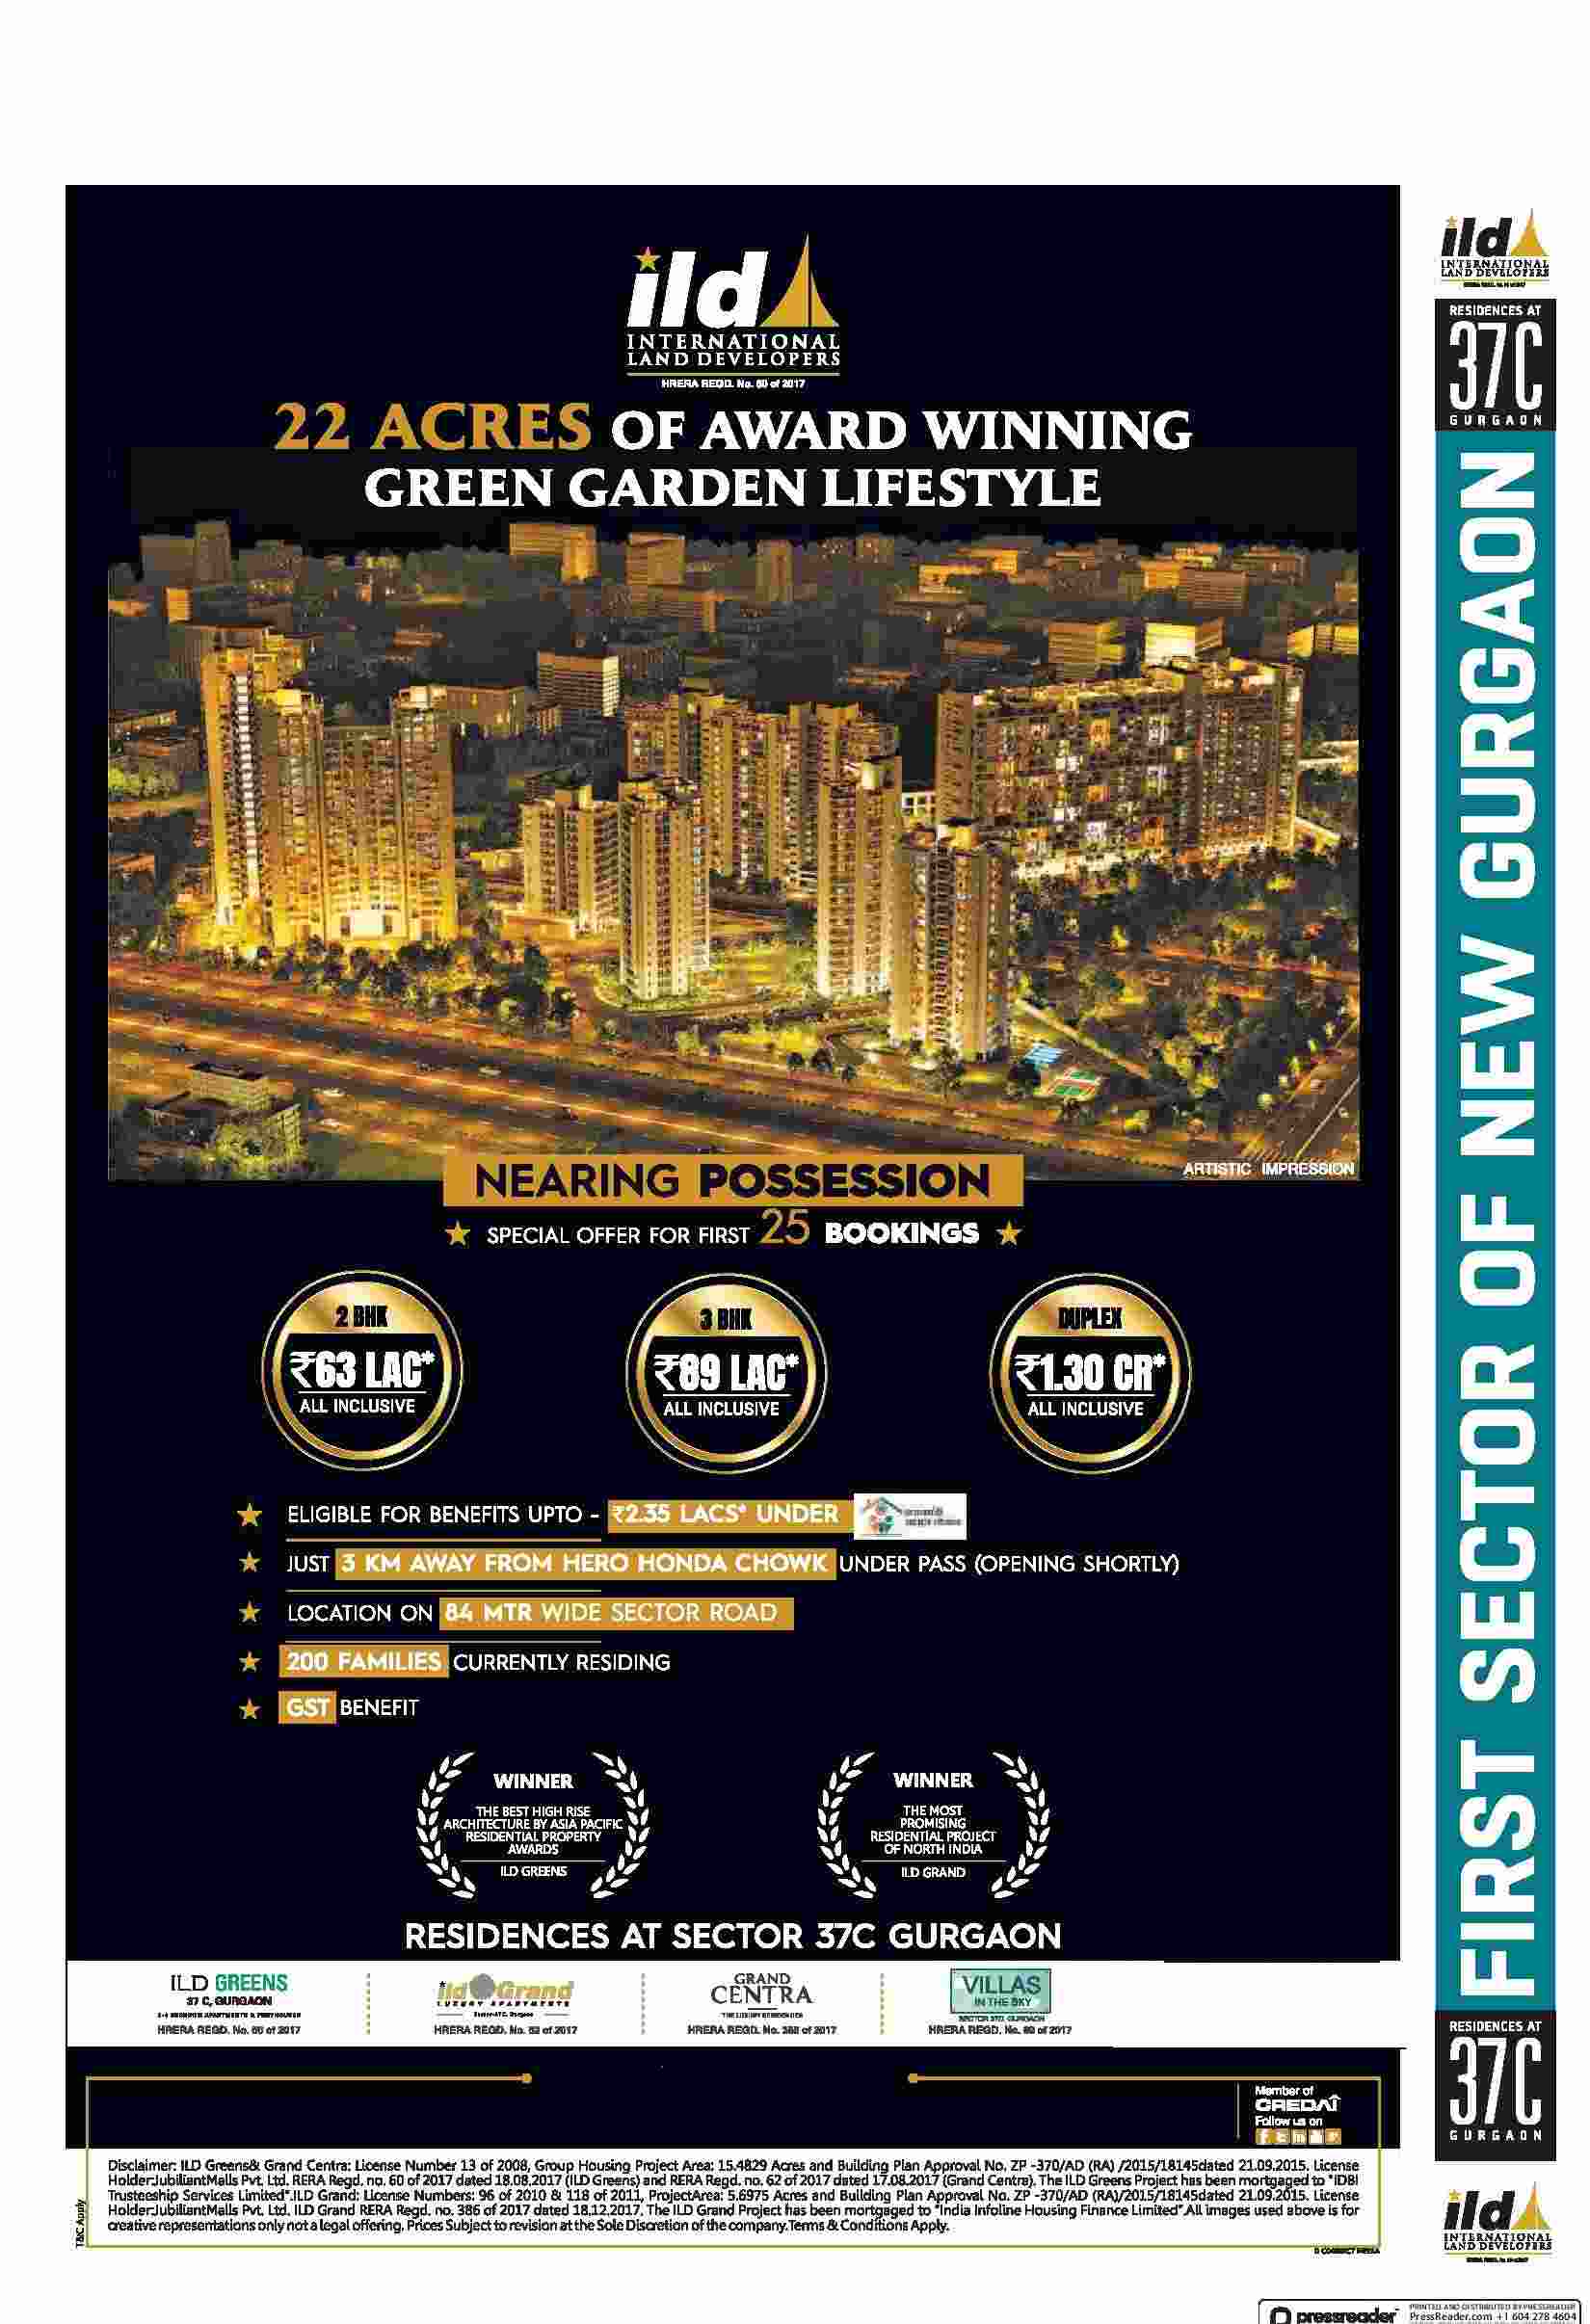 Book a home by ILD at Sector 37C & experience green garden lifestyle in Gurgaon Update